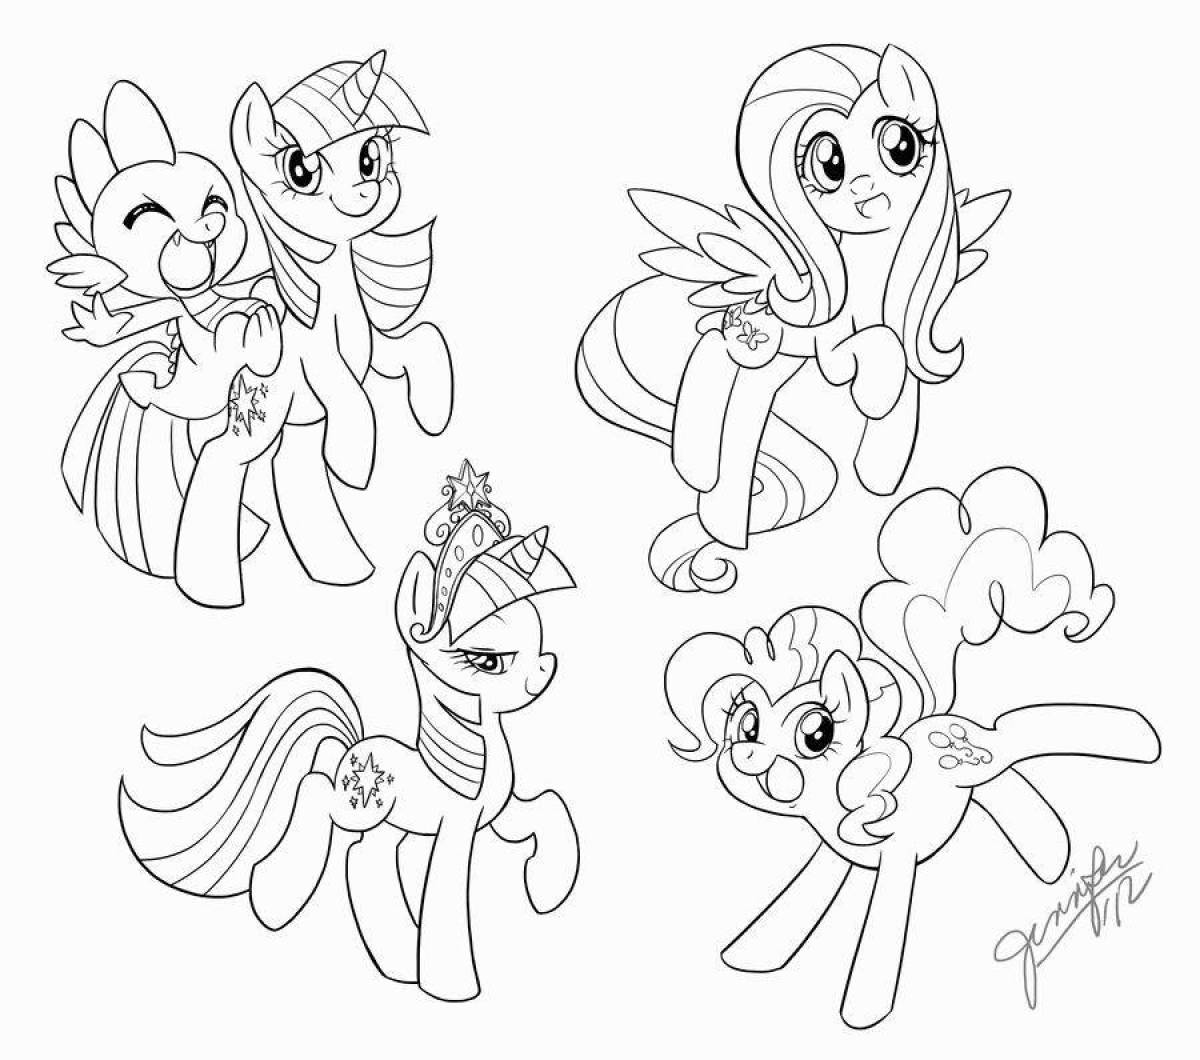 Colorful pony life coloring page